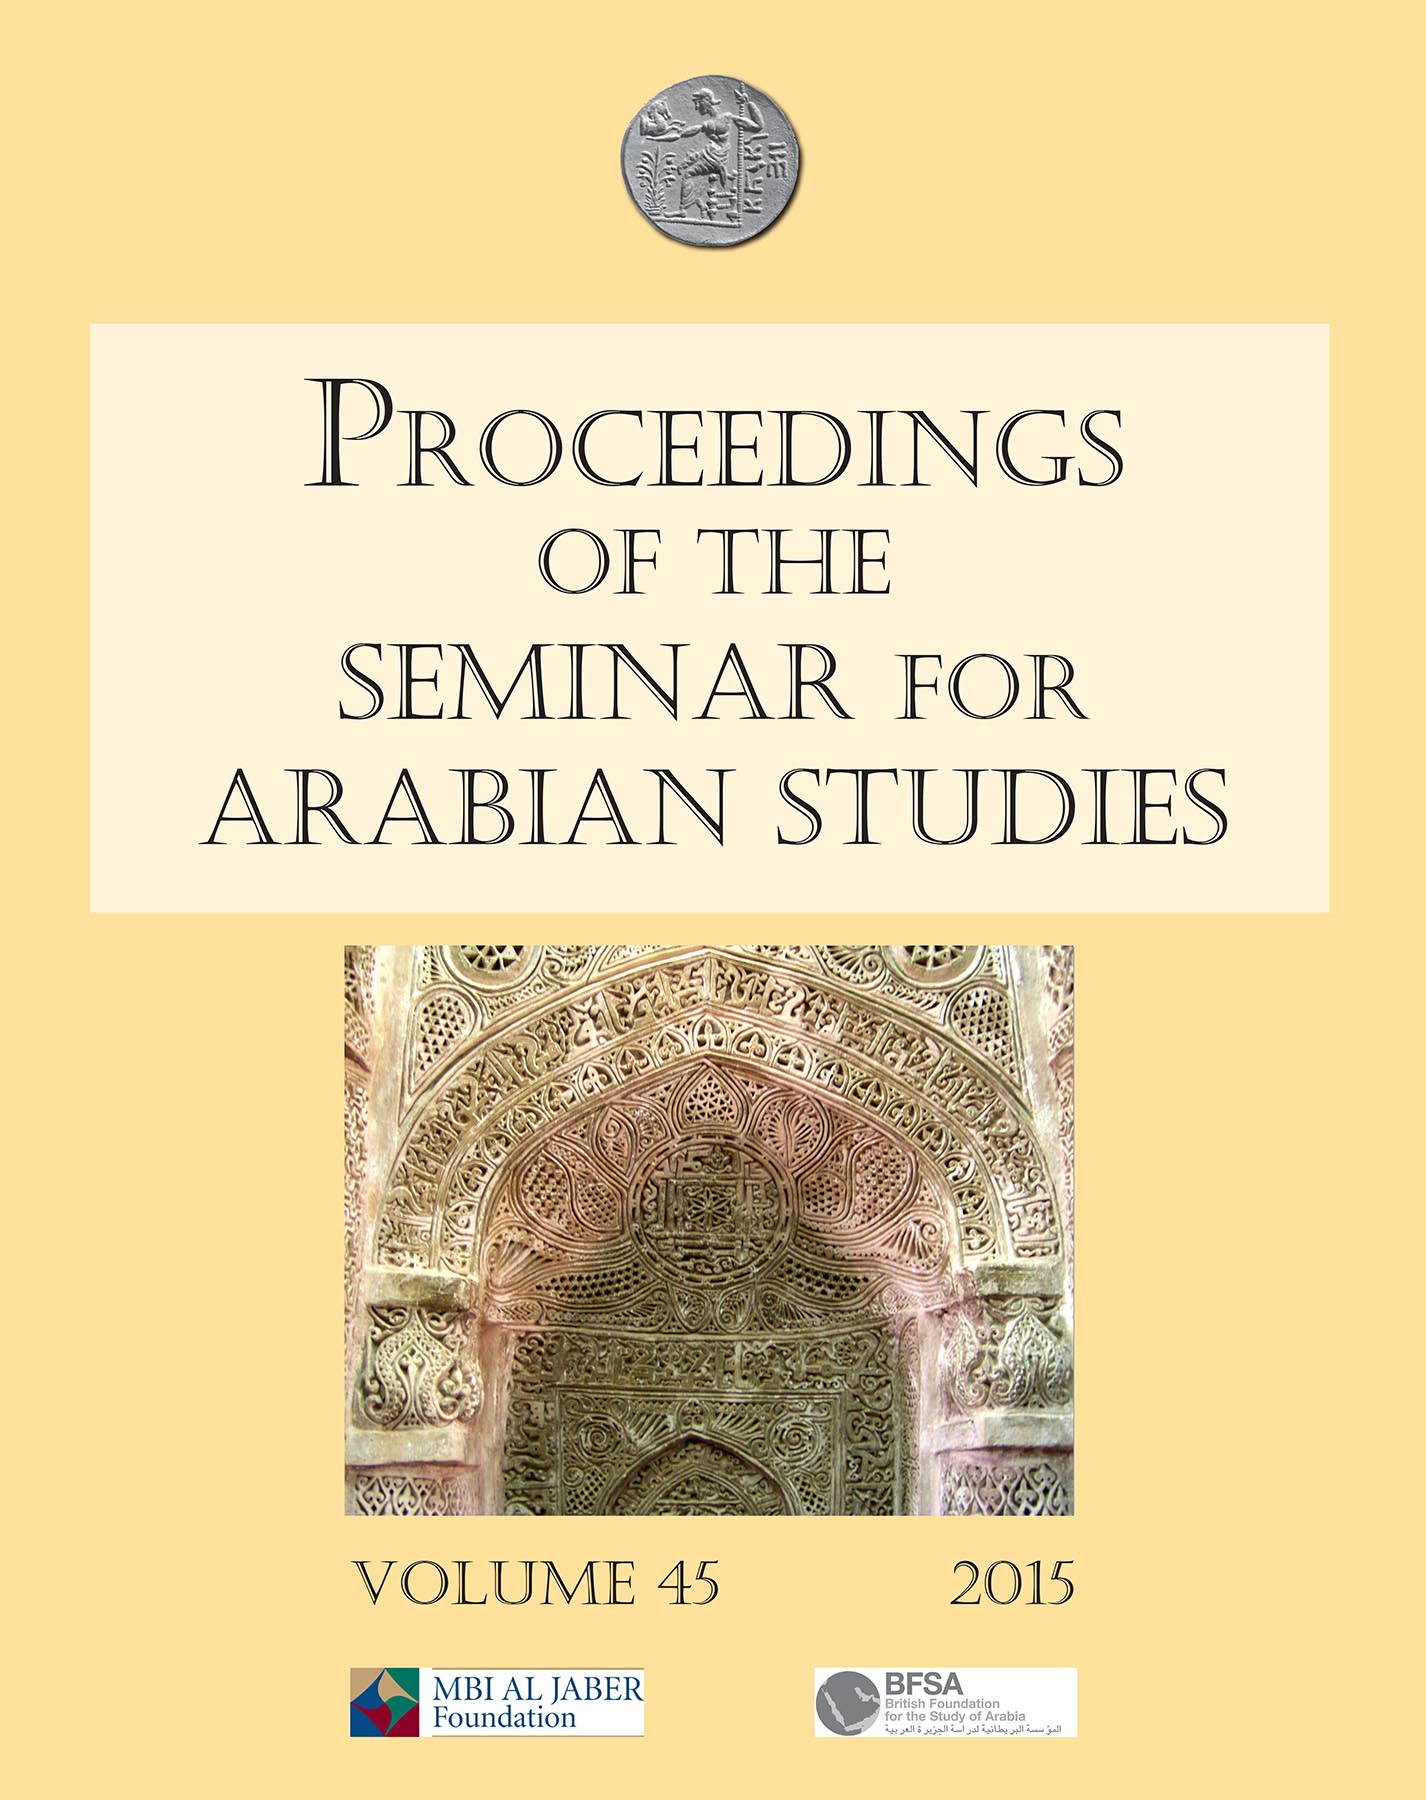 					View Vol. 45 (2015): Proceedings of the Seminar for Arabian Studies Volume 45 2015: Papers from the forty-eighth meeting of the Seminar for Arabian Studies held at the British Museum, London, 25–27 July 2014
				